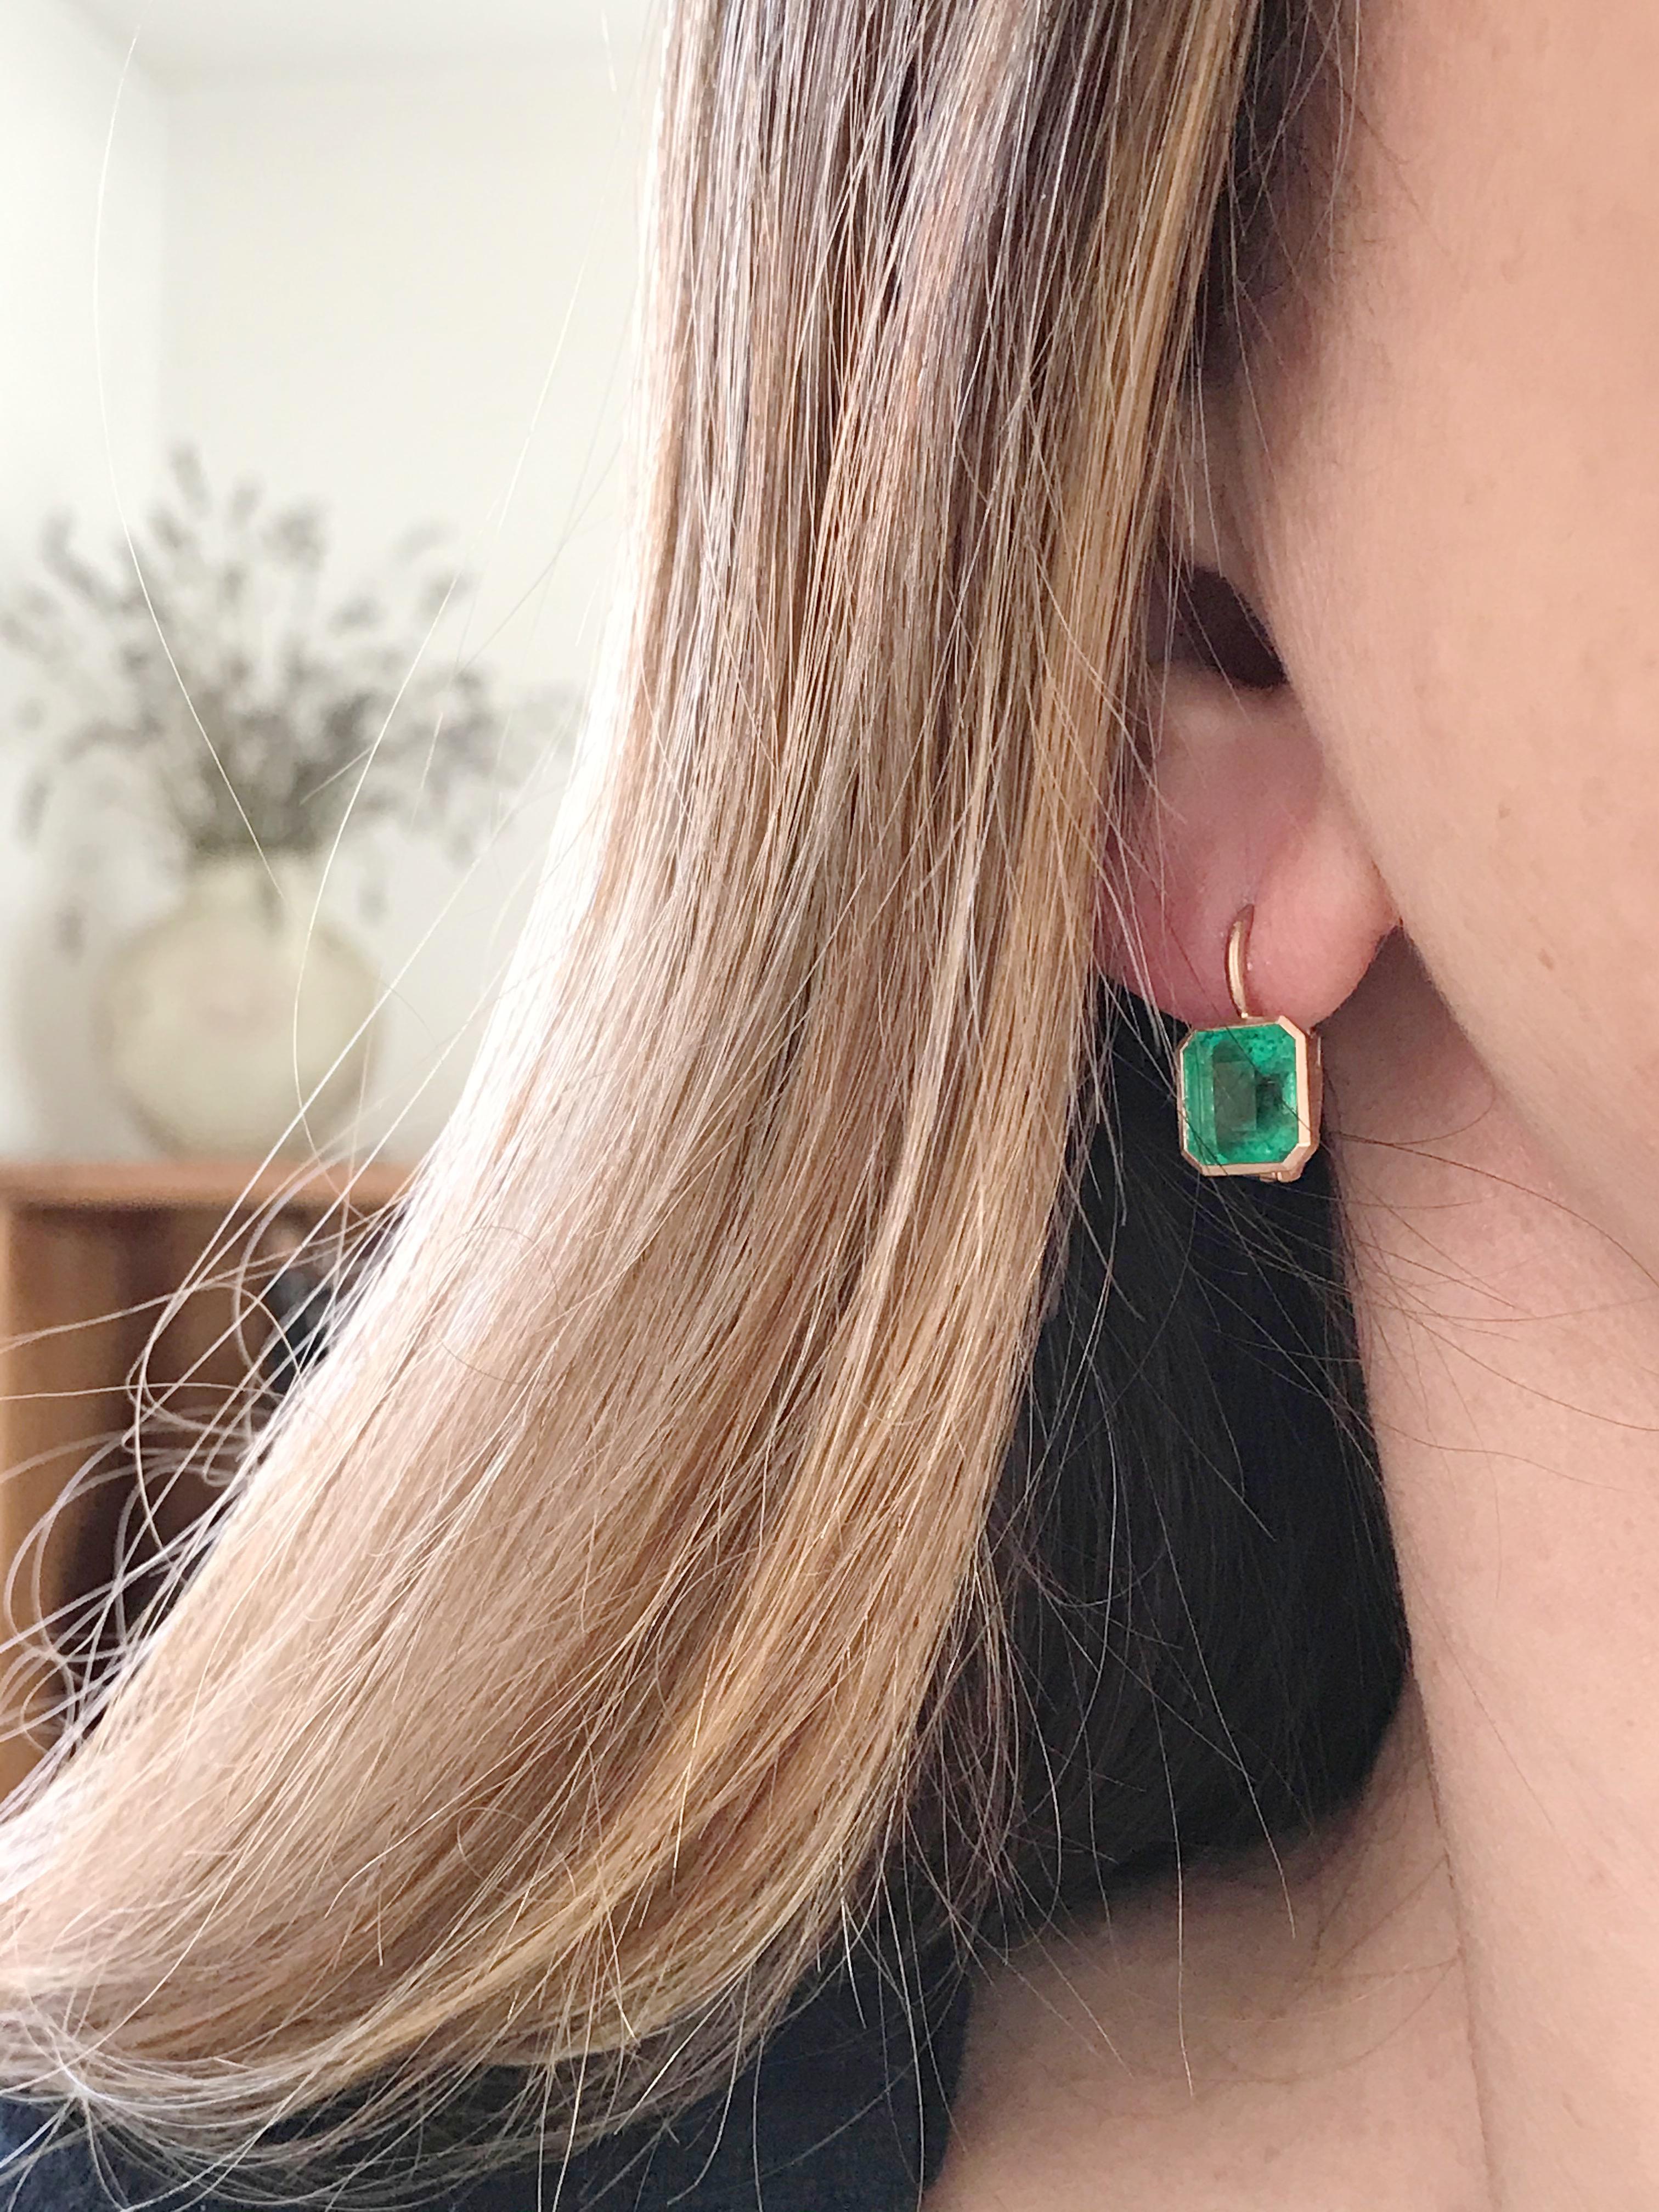 Dalben design  18k rose gold matte finishing earrings with two bezel-set emerald faceted cut light green emerald weight 5,62 carats . 
Bezel stone dimensions :
 width 8,8 - 8,6 mm
height without leverback 9,4 -9,0 mm
height with leverback 17 mm
The